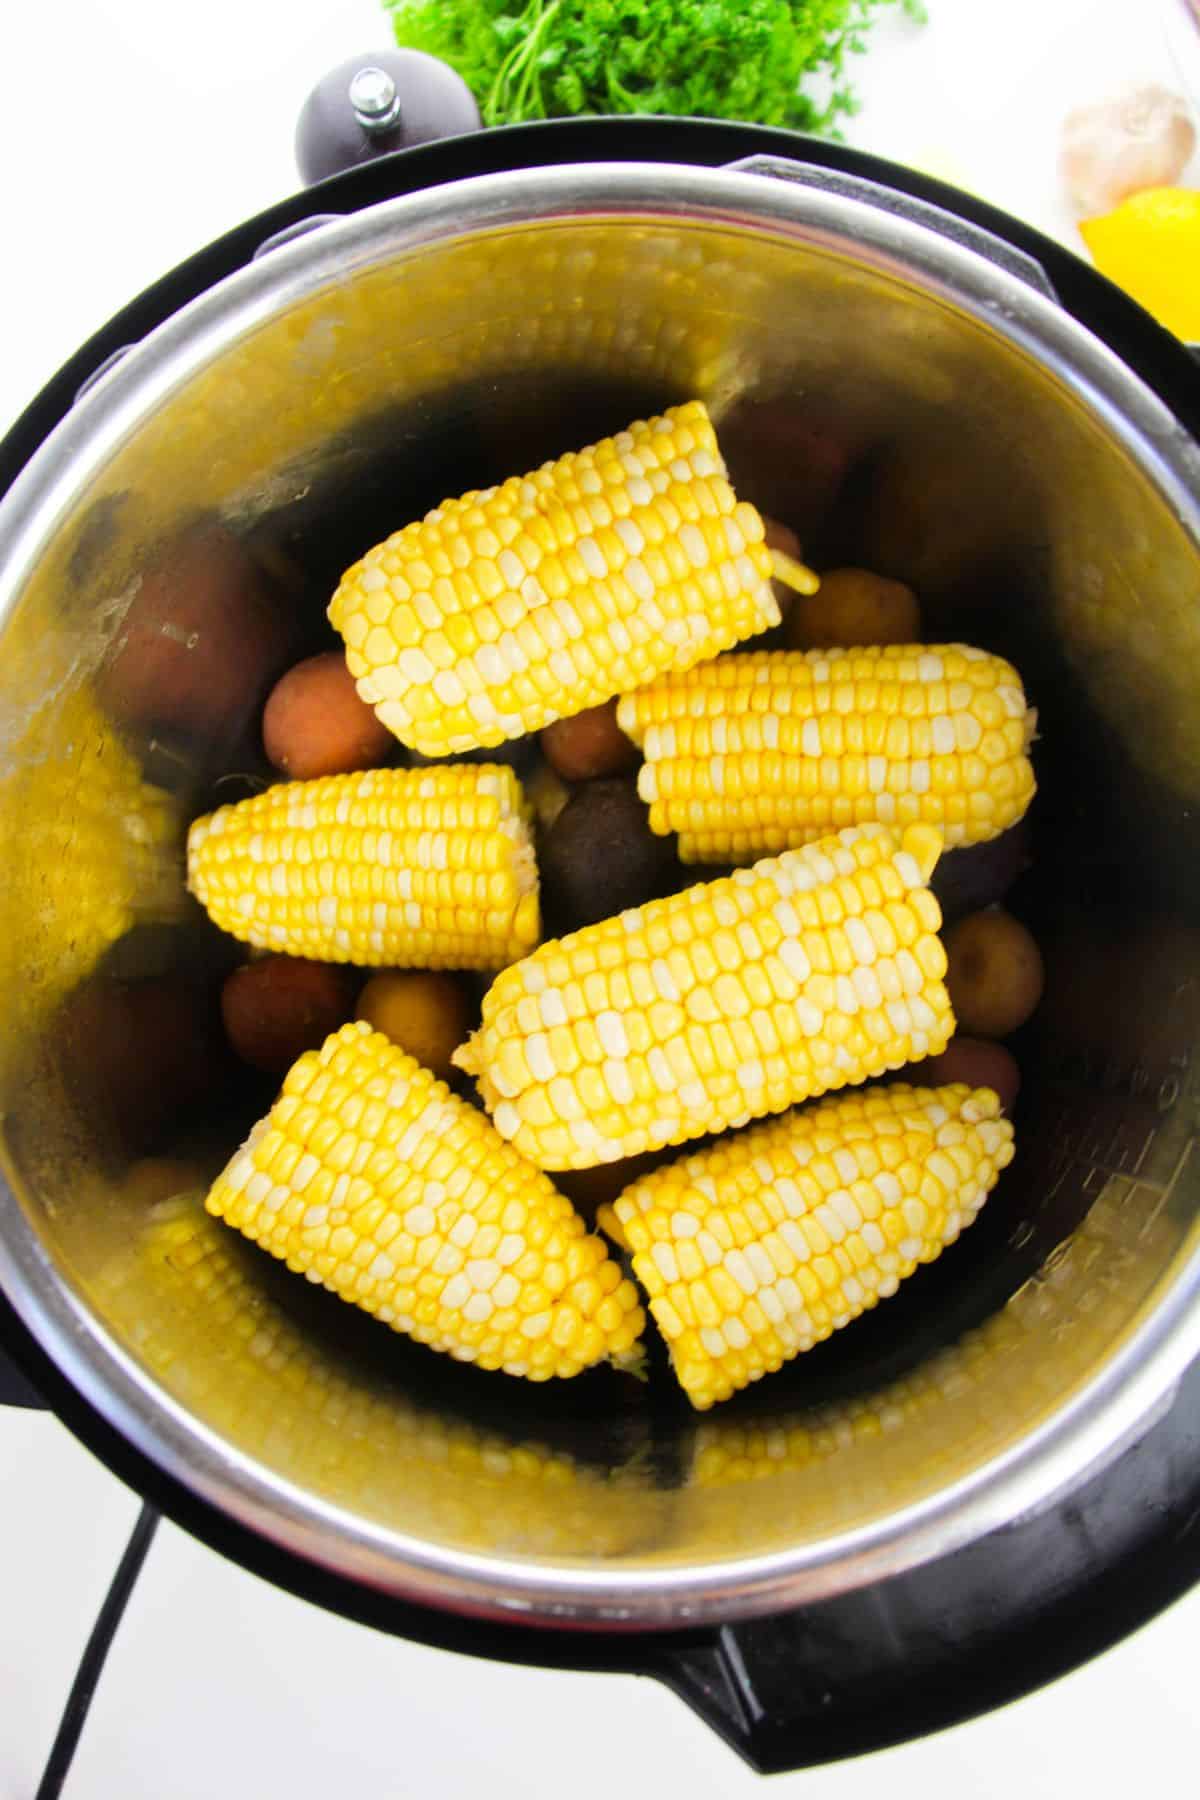 Corn and baby potatoes inside the Instant Pot